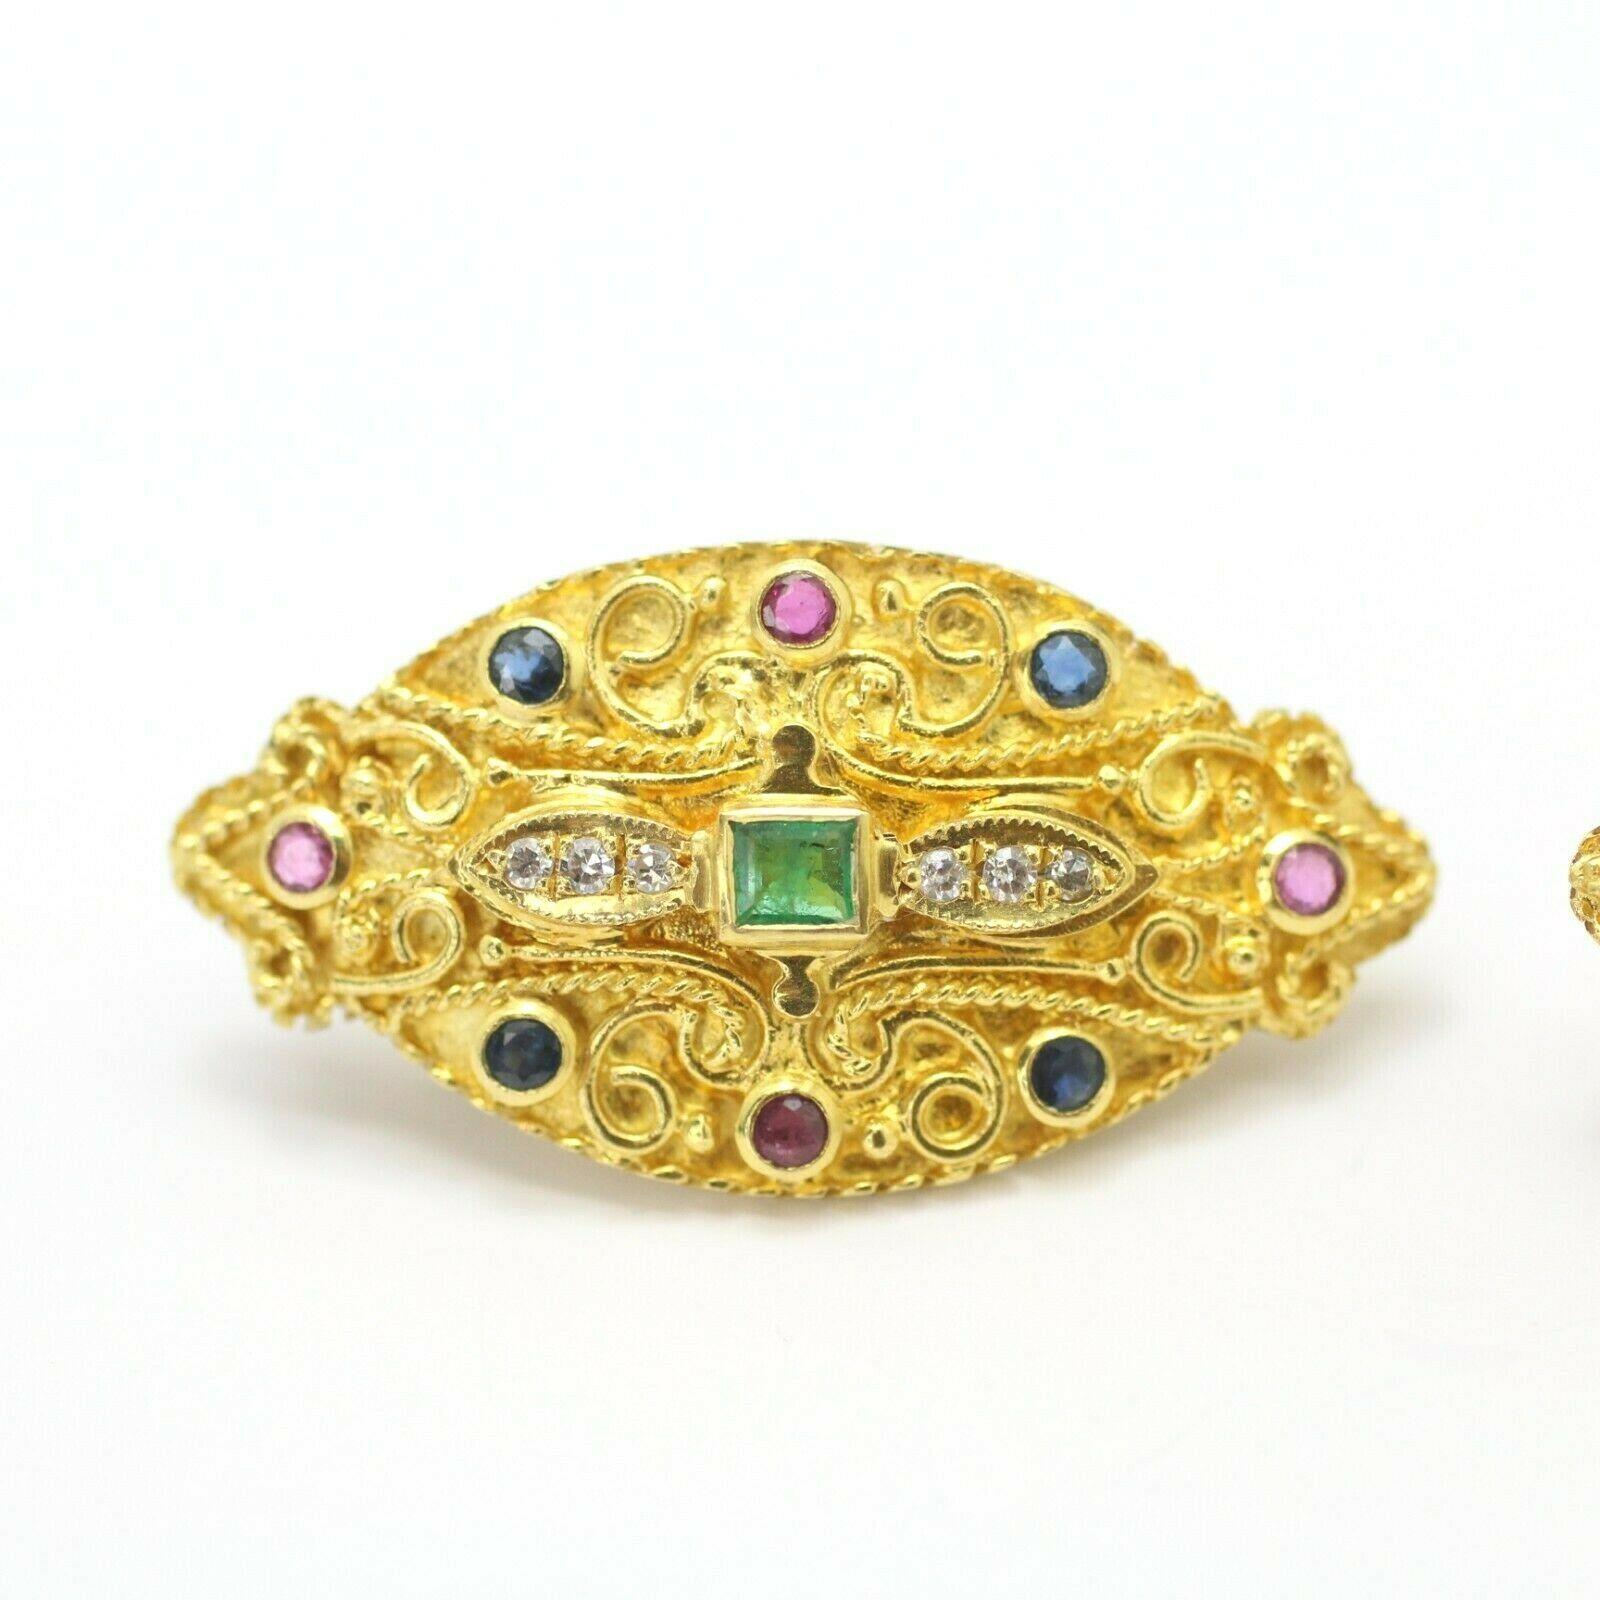  Specifications:
    main stone: EMERALD, SAPPHIRE, AMETHYST
    SIDE STONE: 12 PCS ROUND DIAMONDS
    color: G
    clarity: SI2
    brand: UNBRANDED
    metal: 18K YELLOW GOLD
    type: EARRINGS
    weight:  15.3GRS
    LENGTH: 1.35INCHES
   